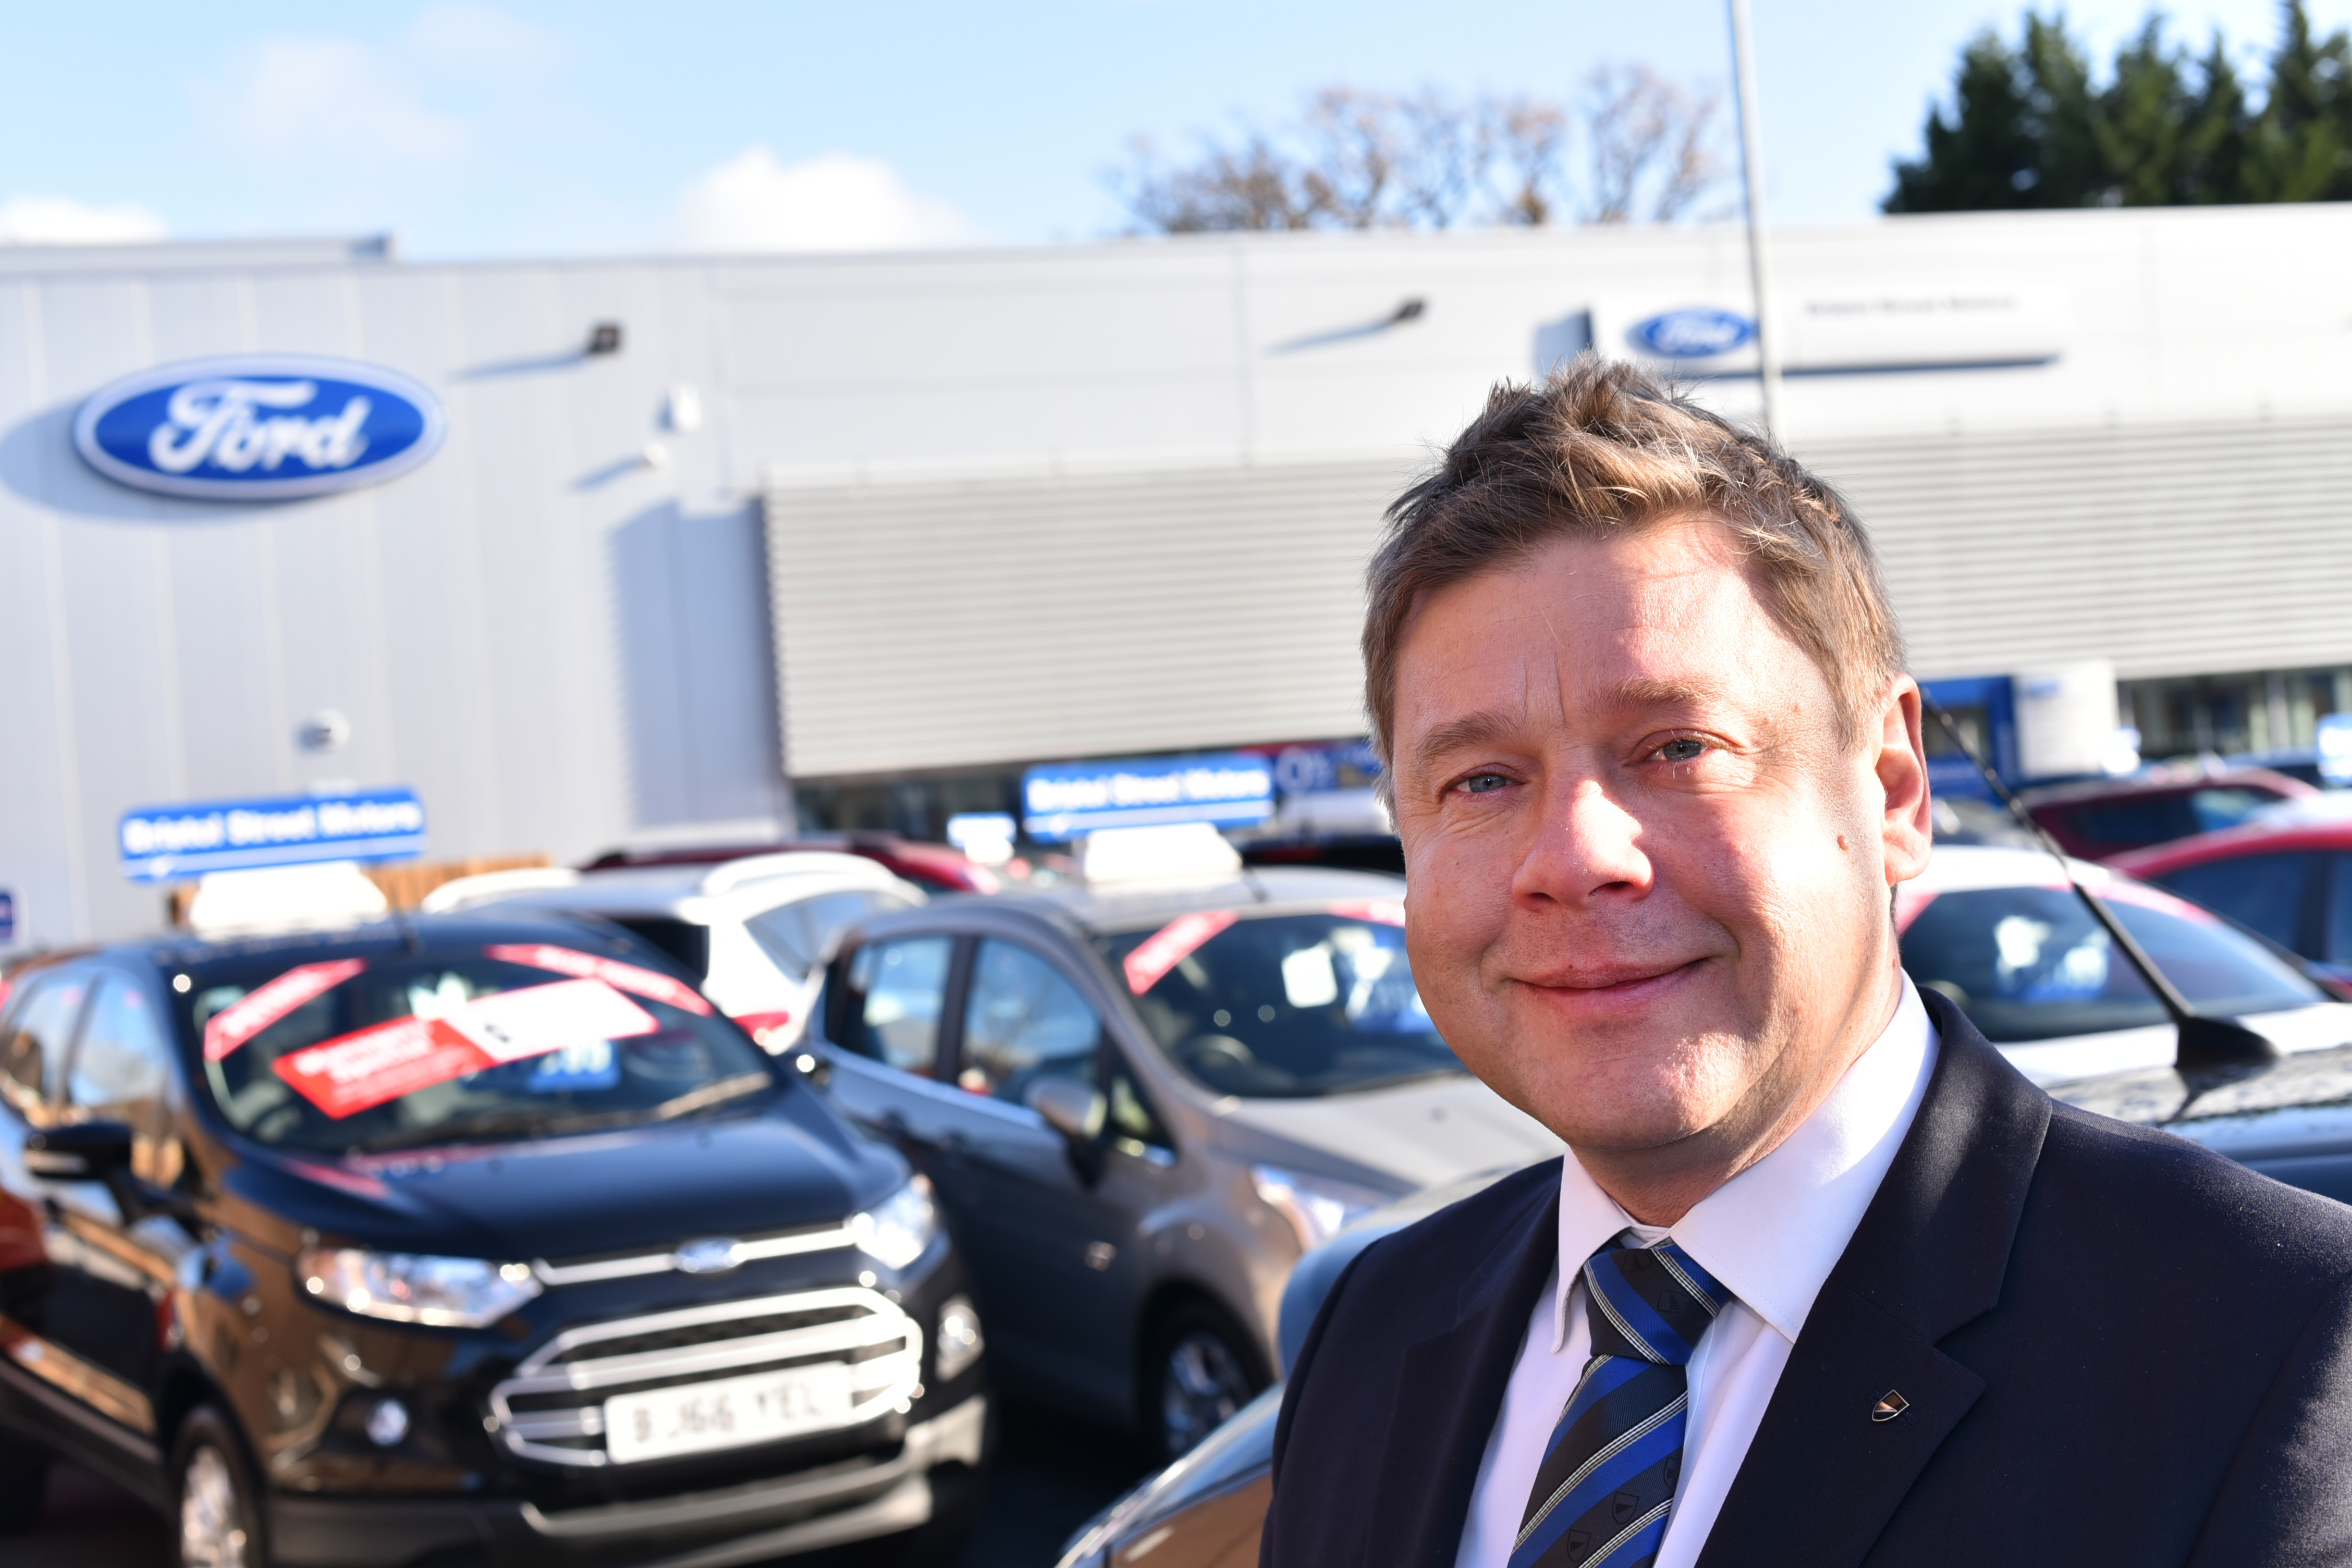 Shirley Ford unveils new £2m dealership